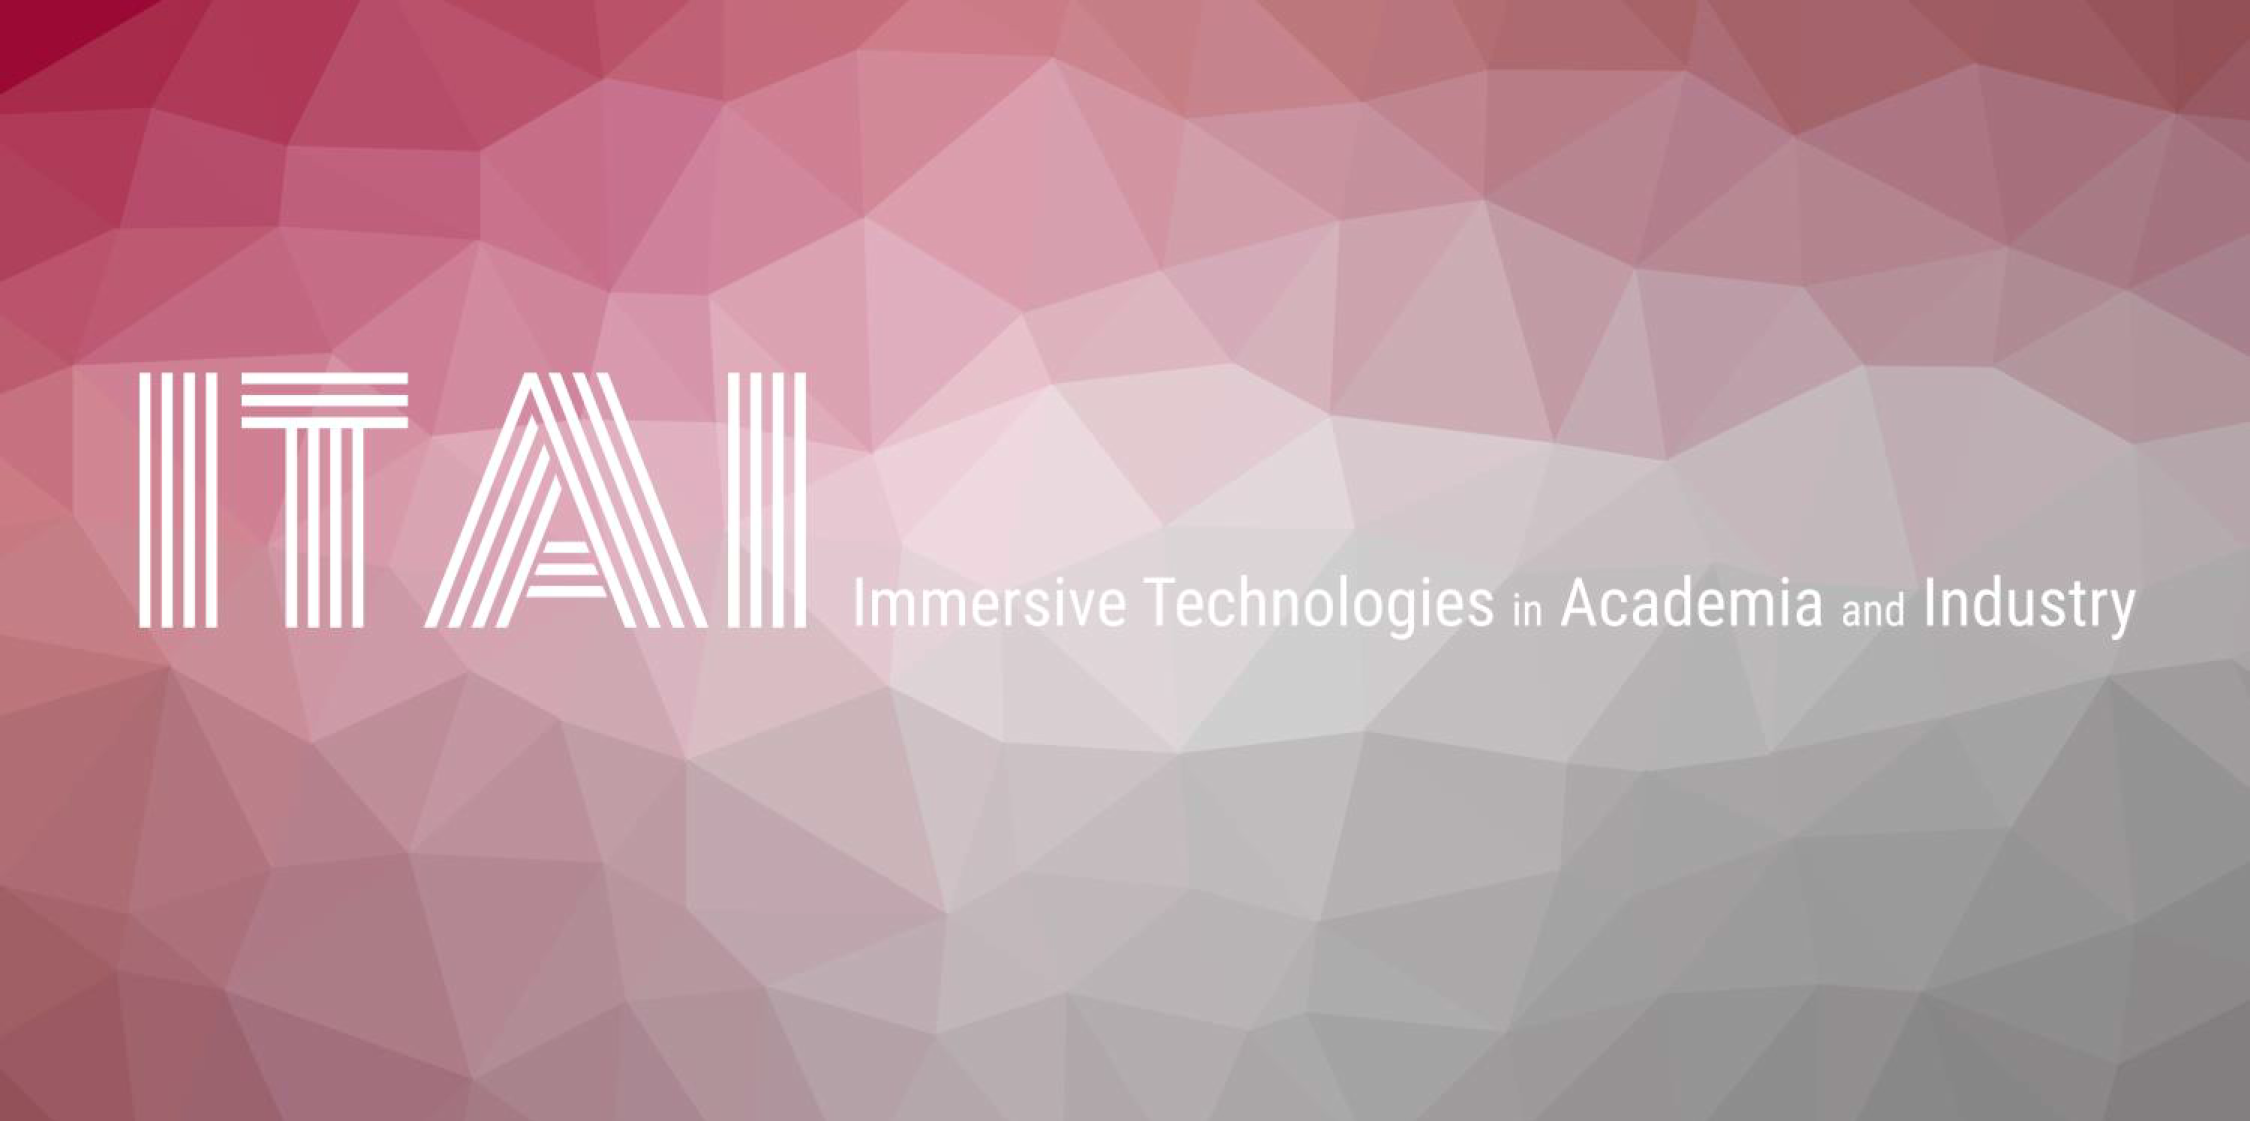 Immersive Technologies in Academia and Industry submission deadline